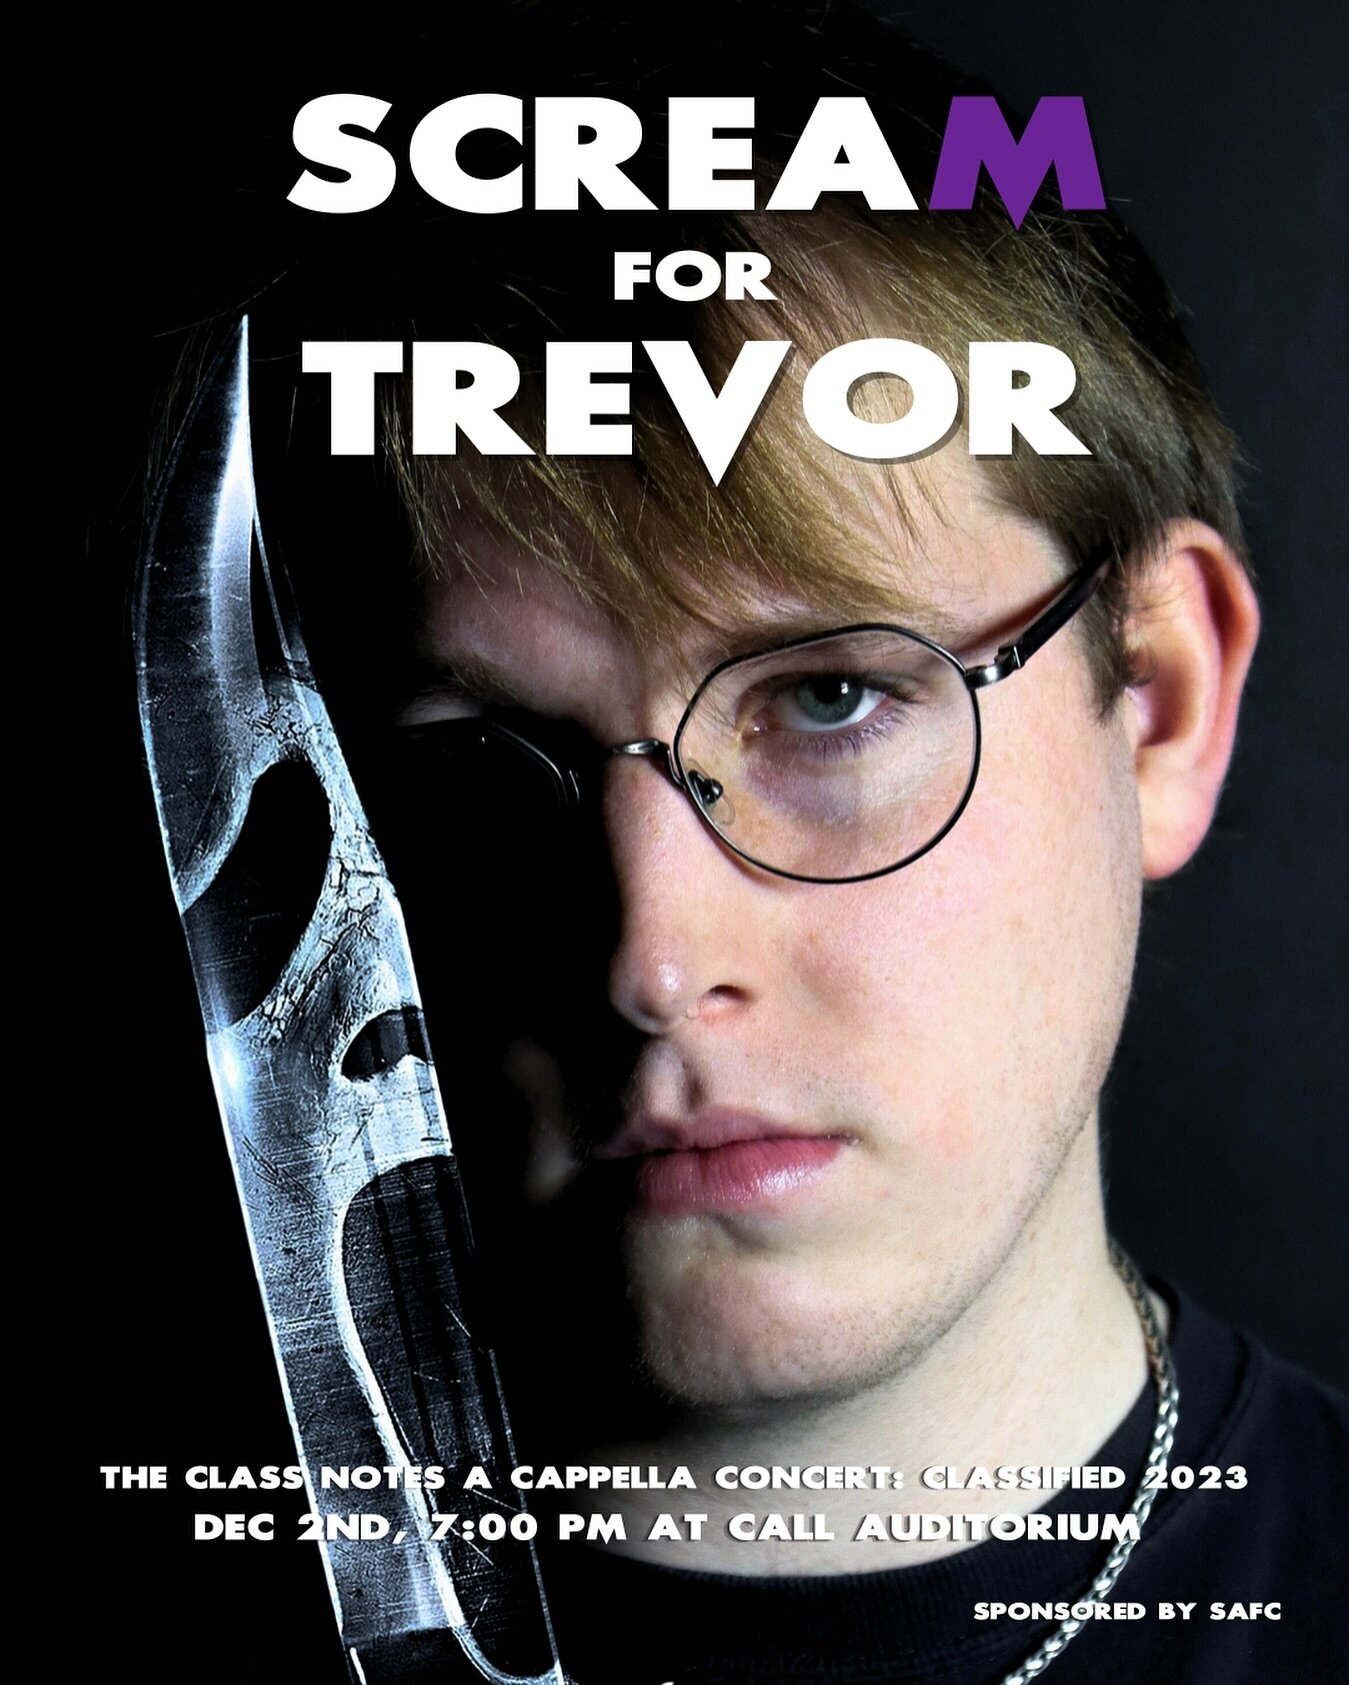 SCREAM for Trevor and the Class Notes TOMORROW at our fall concert on December 2nd, at 7PM at Call Auditorium. Get your ticket through the link in our bio or DM us.